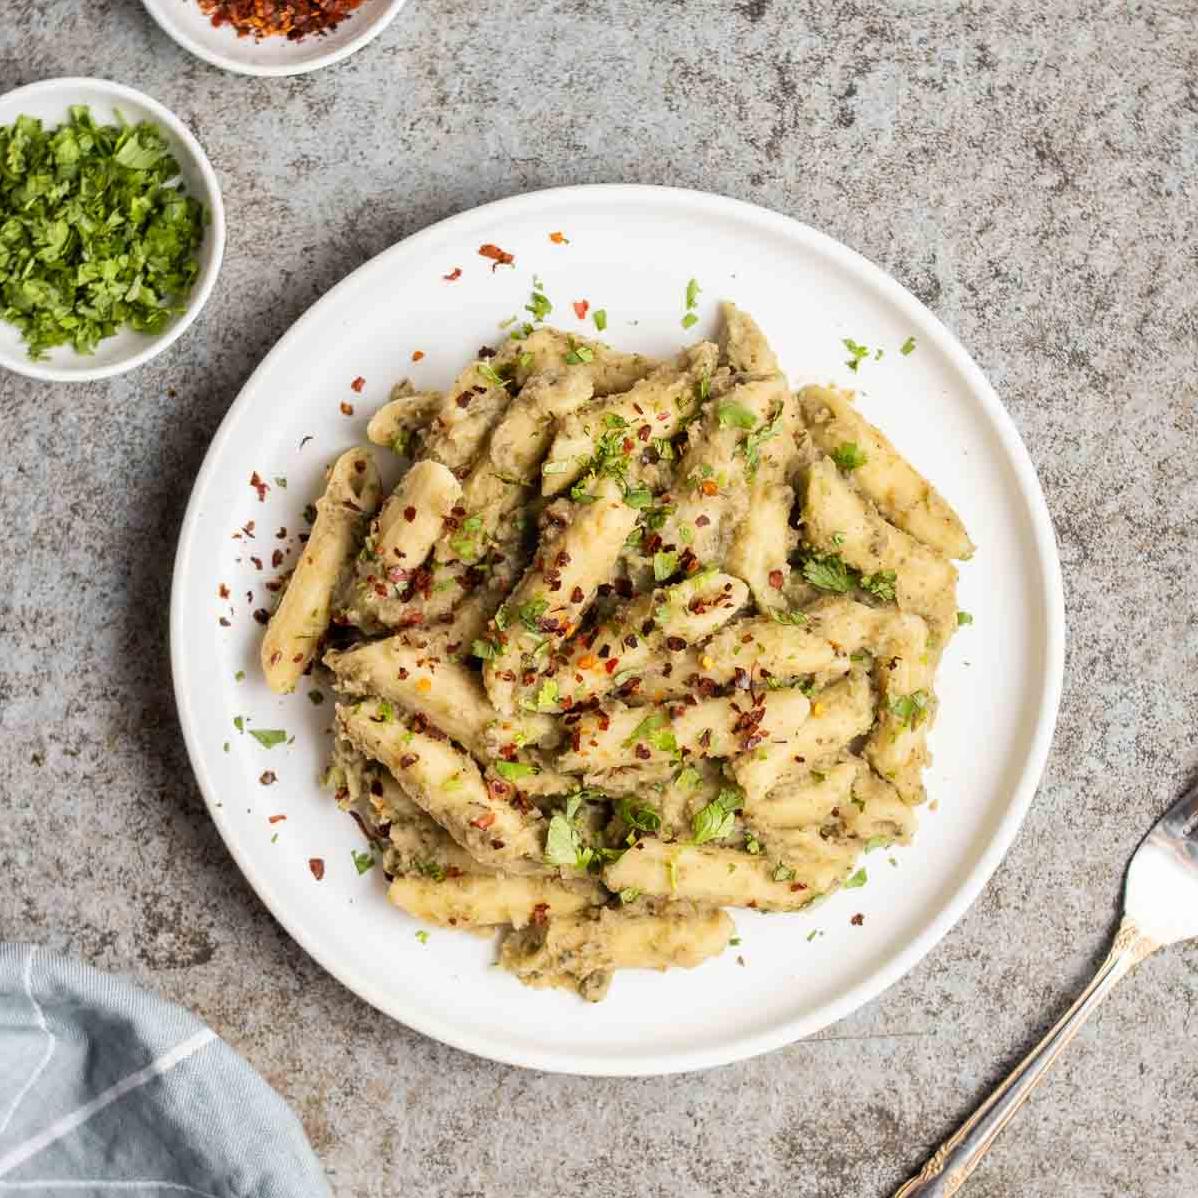  This vegan penne and broccoli recipe is perfect for when you need a quick and easy weeknight meal.